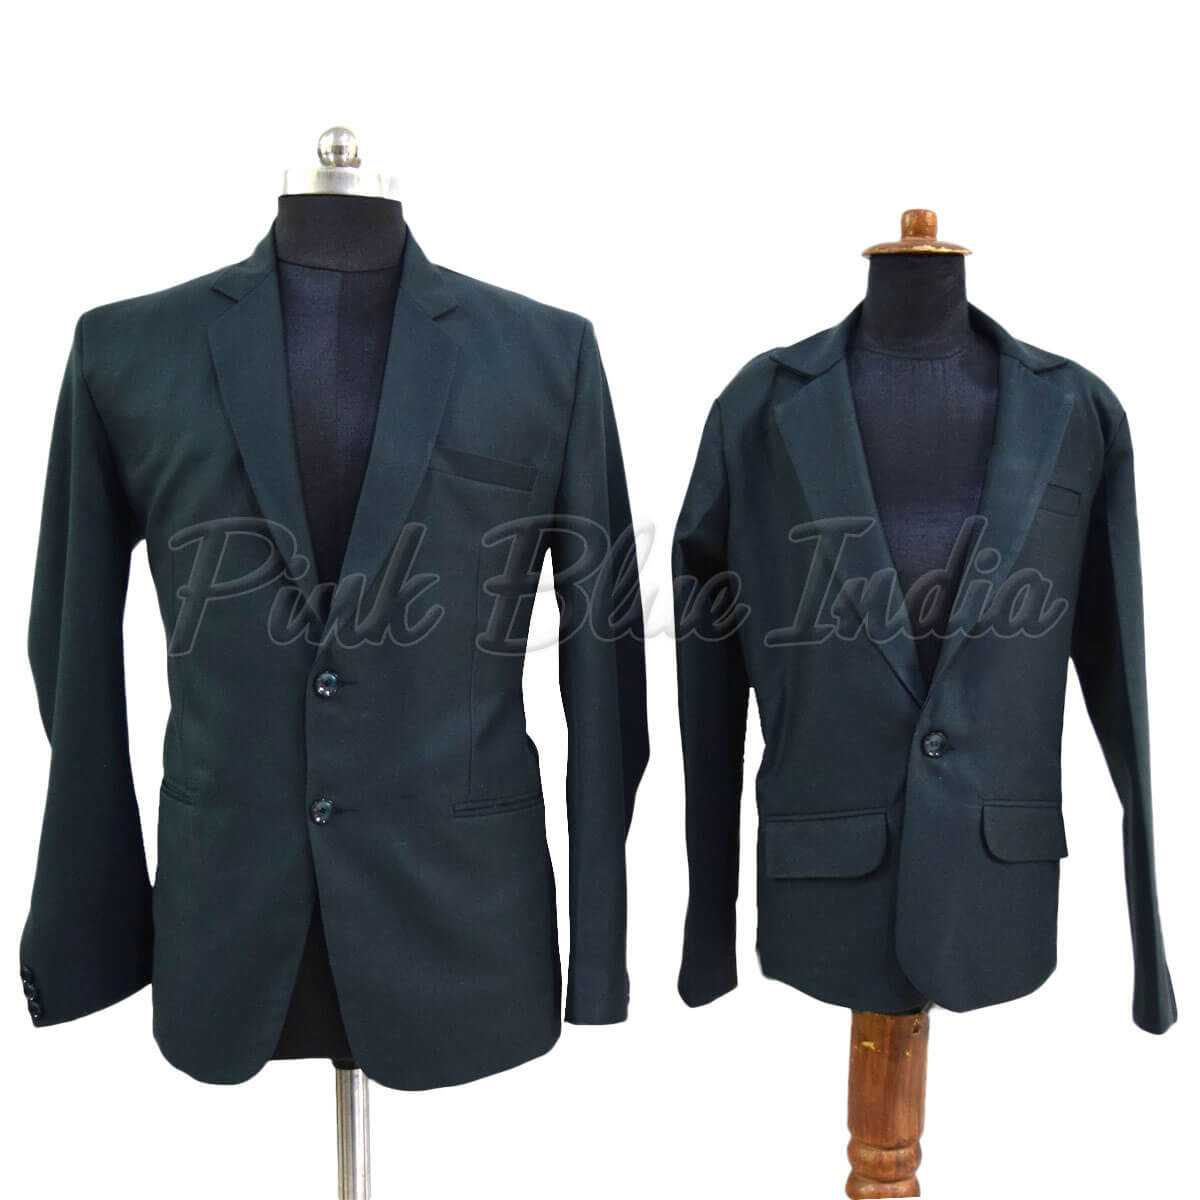 Matching Green Coat & Blazer for Father and Son